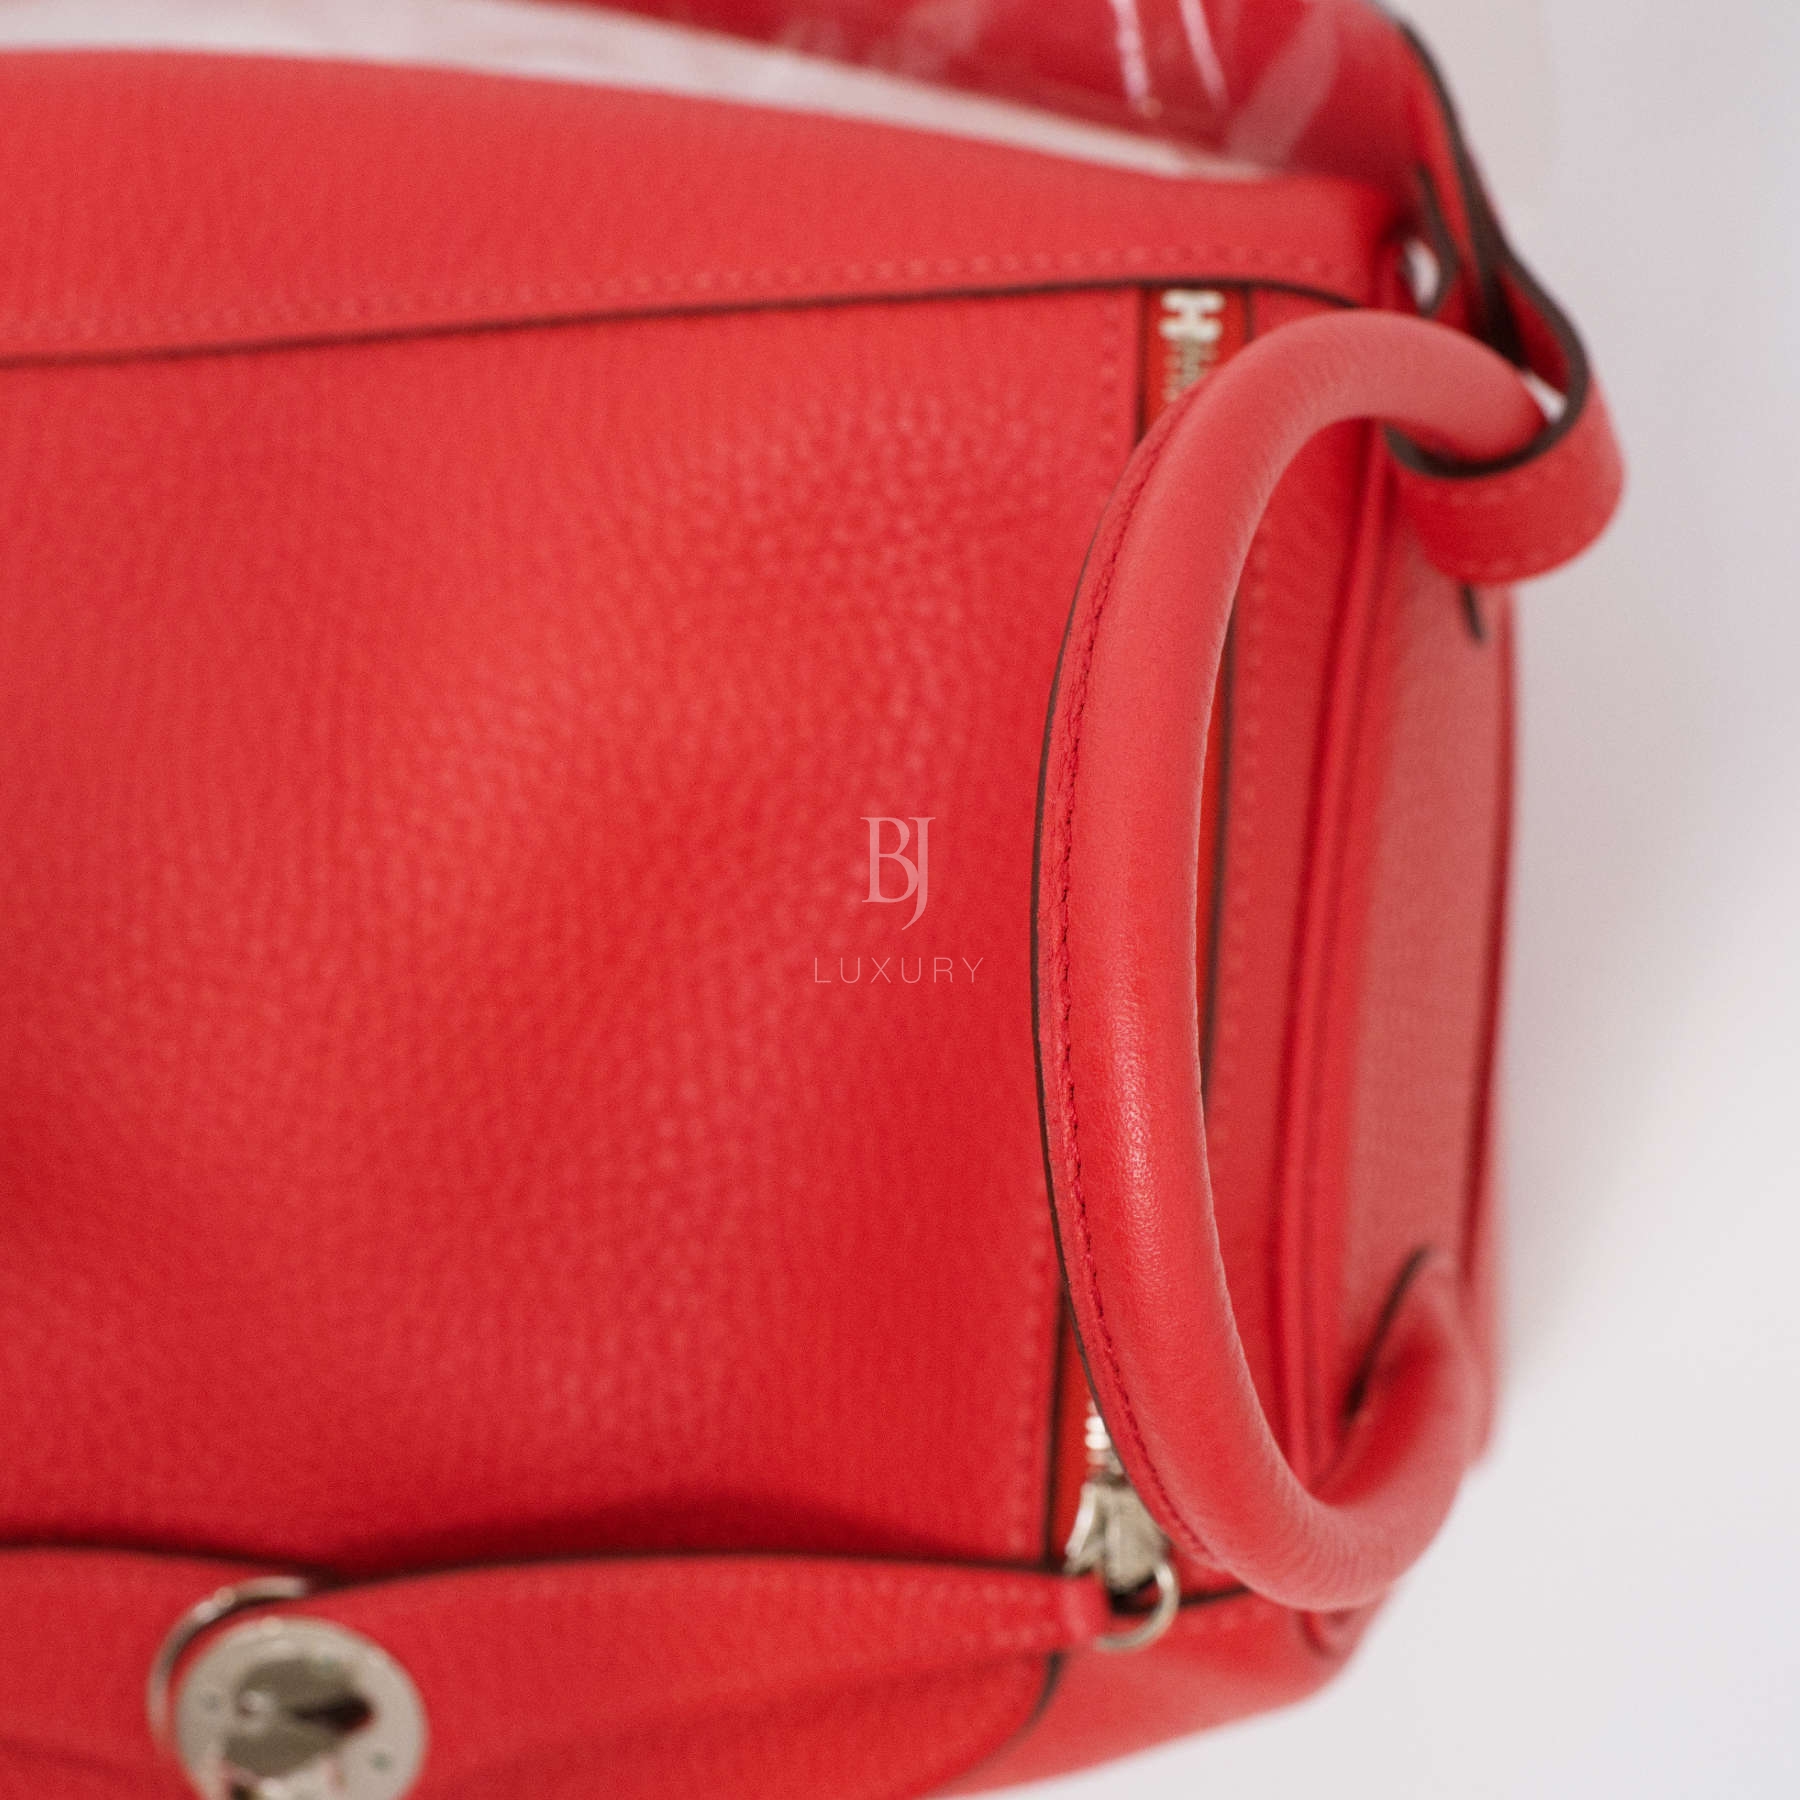 HERMES-LINDY-26-ROUGETOMATE-CLEMENCE-4812 handle2.jpg